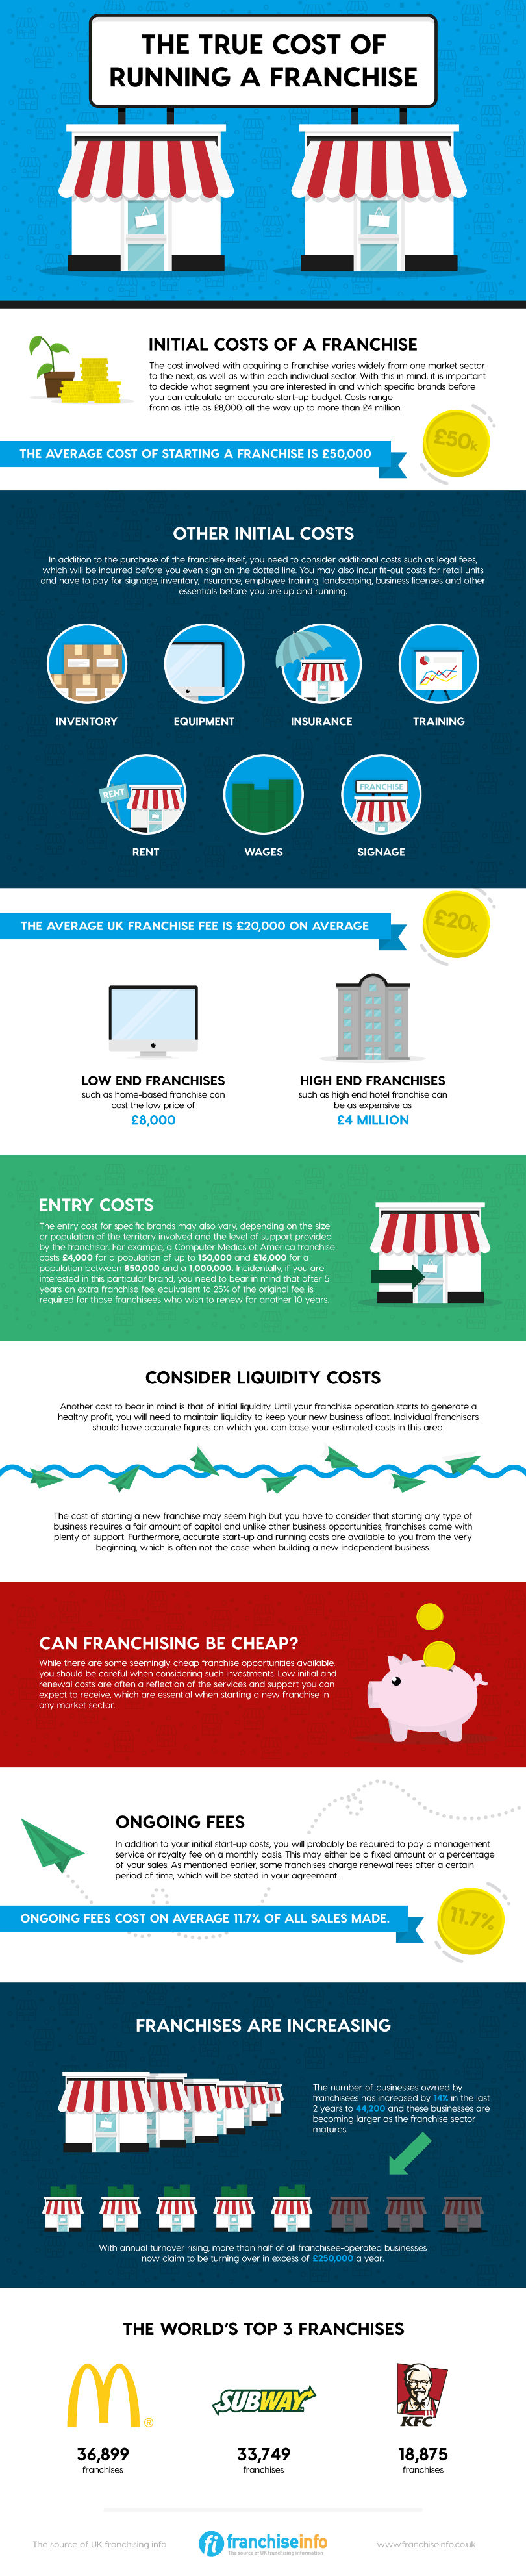 The cost of running a franchise - infographic